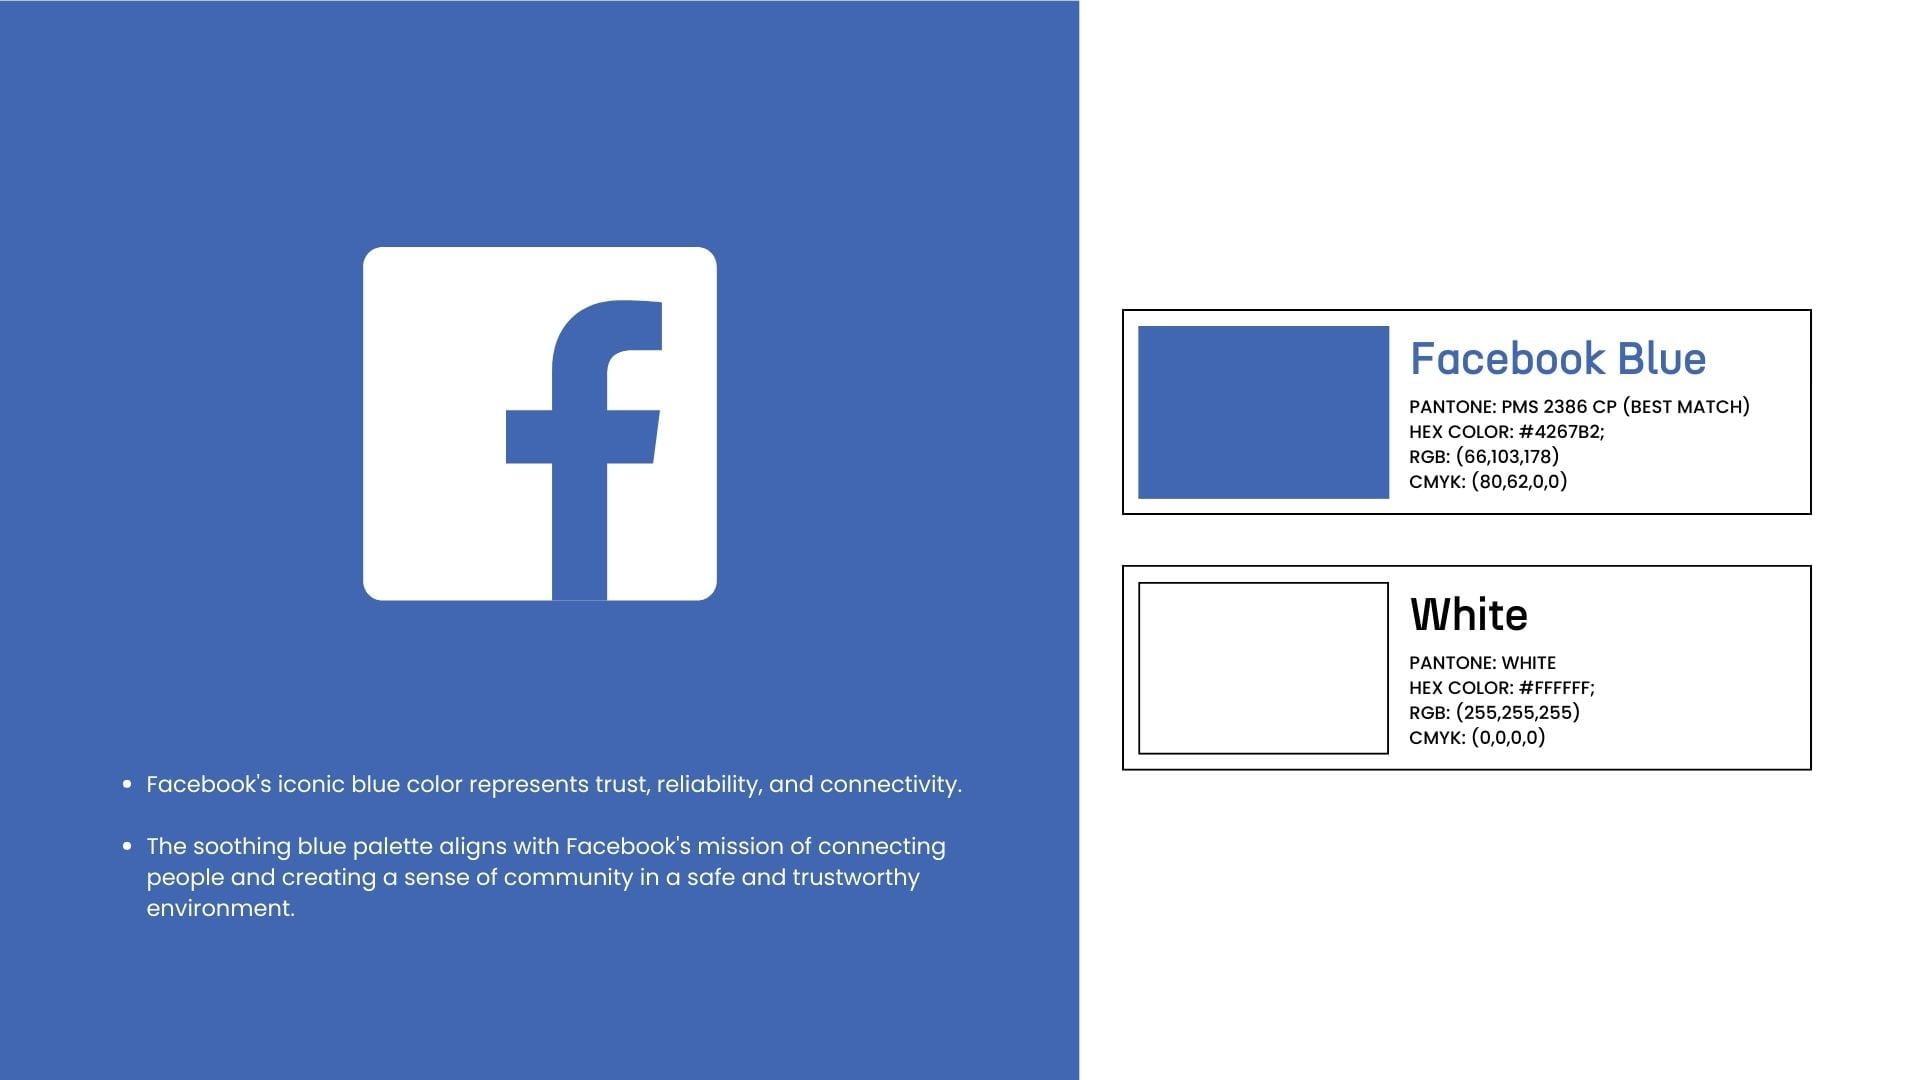 Facebook Brand Colors Article by House of Brands Media